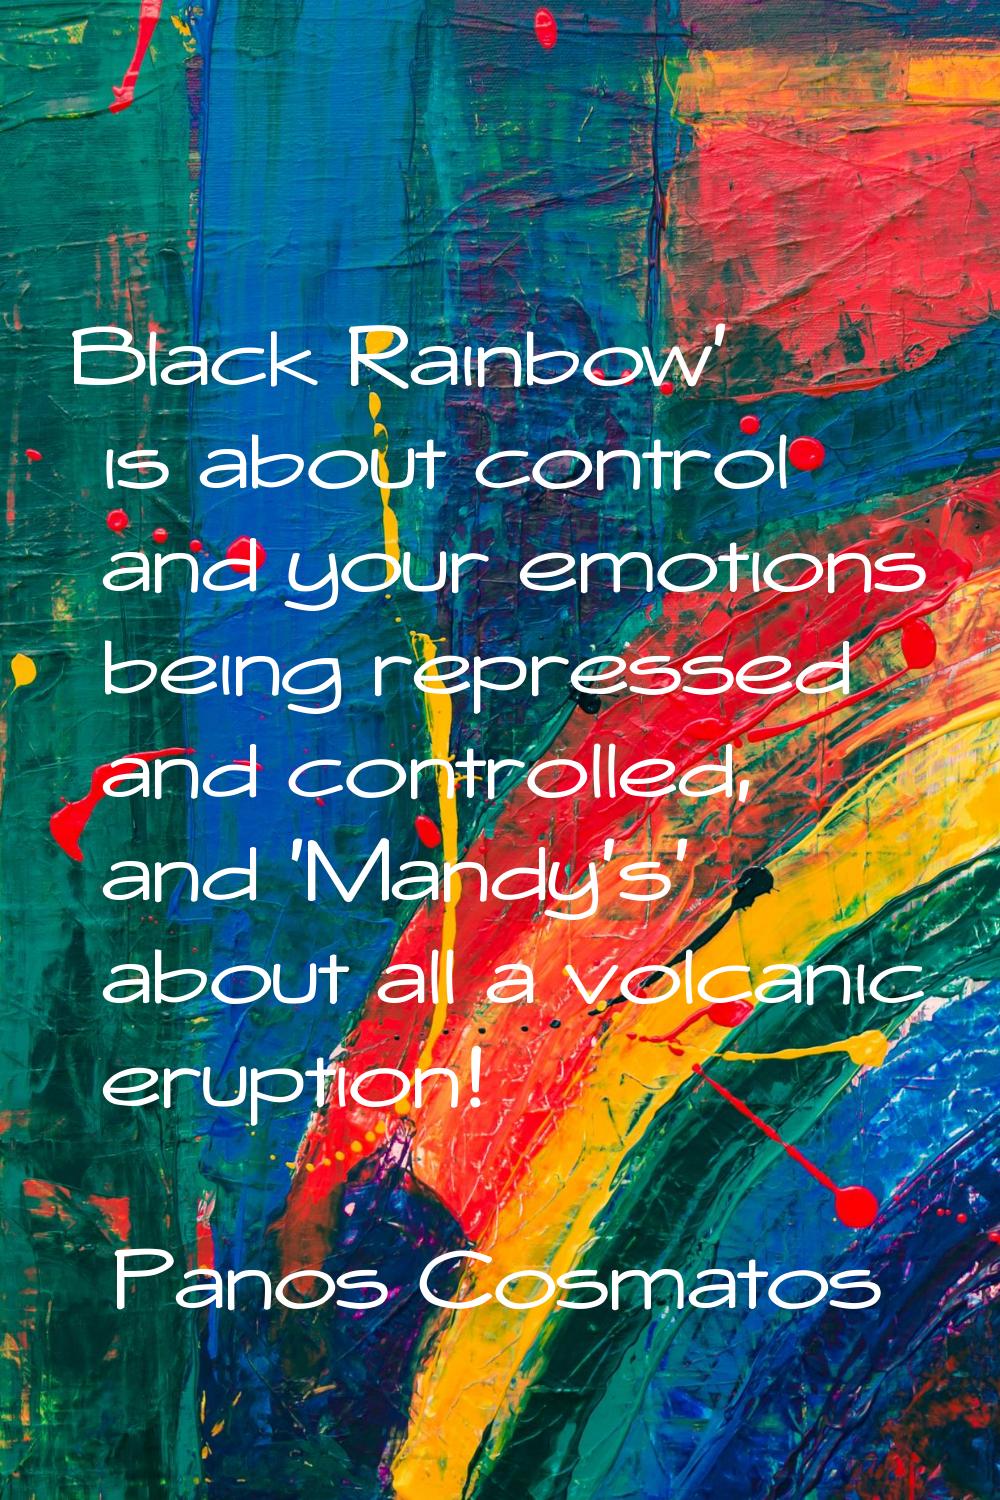 Black Rainbow' is about control and your emotions being repressed and controlled, and 'Mandy's' abo